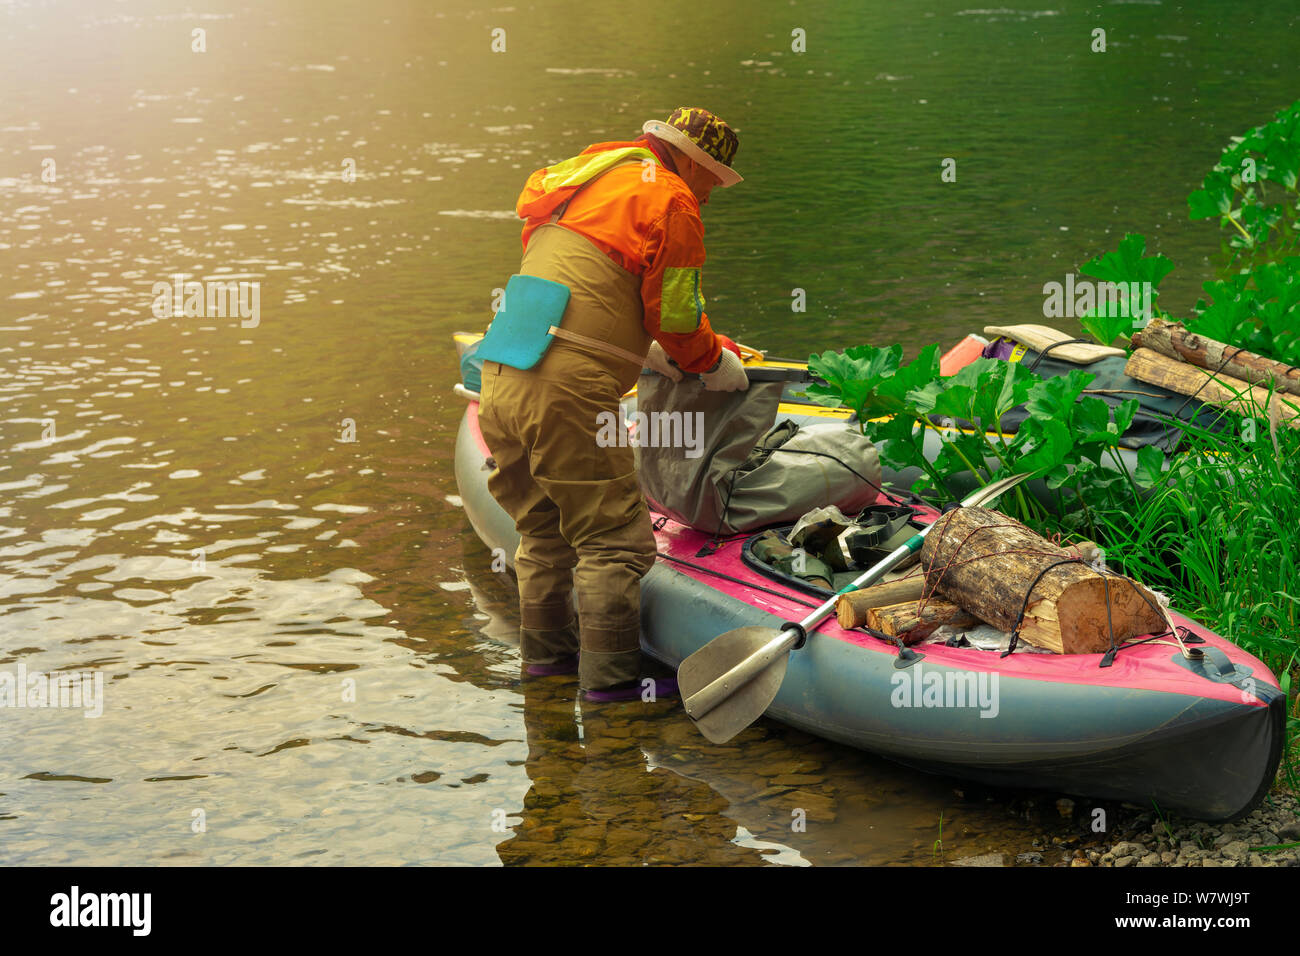 Focus some part of young person are rafting in river. Summer green river boat scene Stock Photo